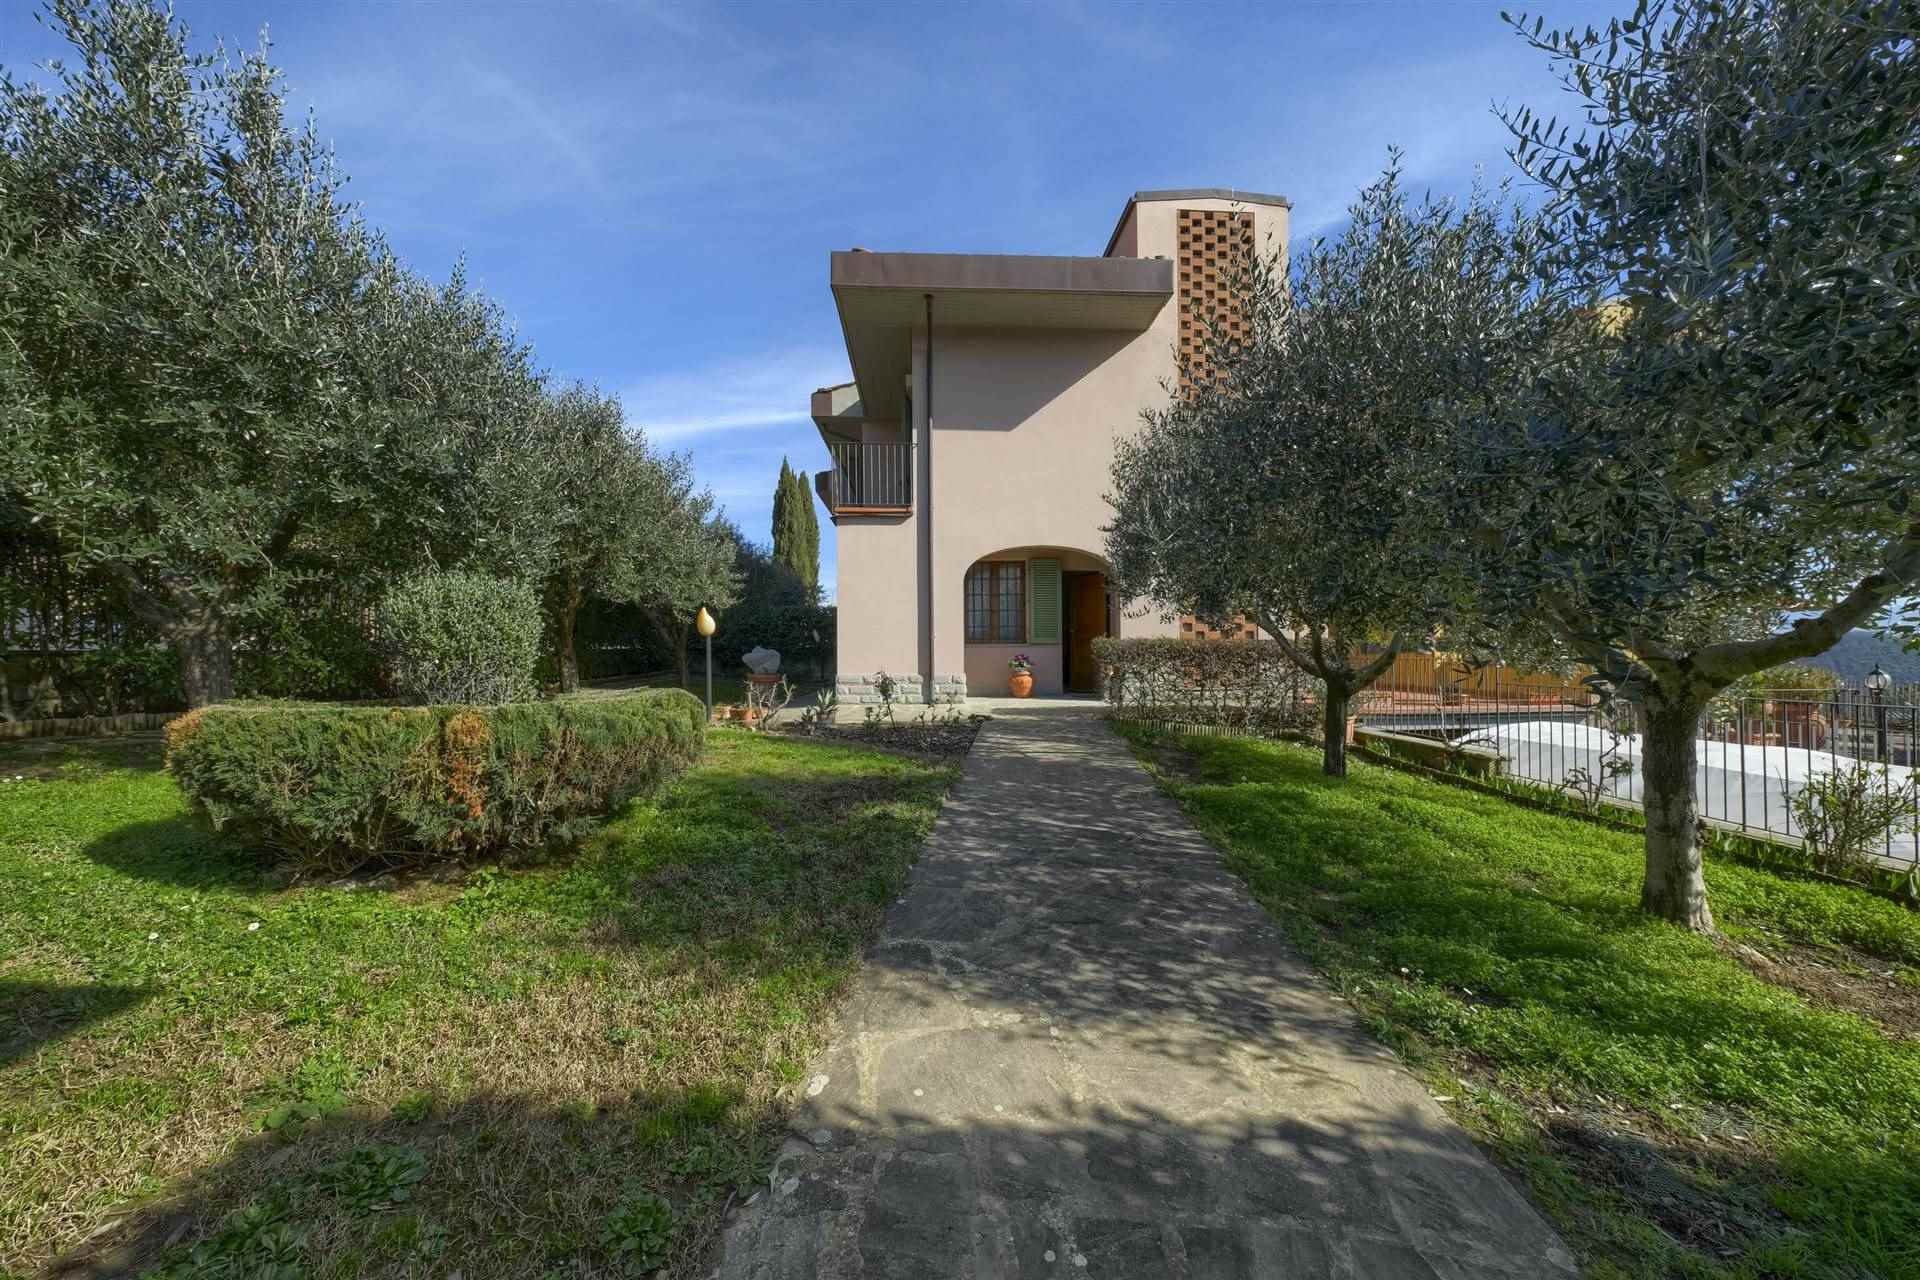 SAN DONATO IN COLLINA, RIGNANO SULL'ARNO, Semi detached house for sale of 187 Sq. mt., Excellent Condition, Heating Individual heating system, 